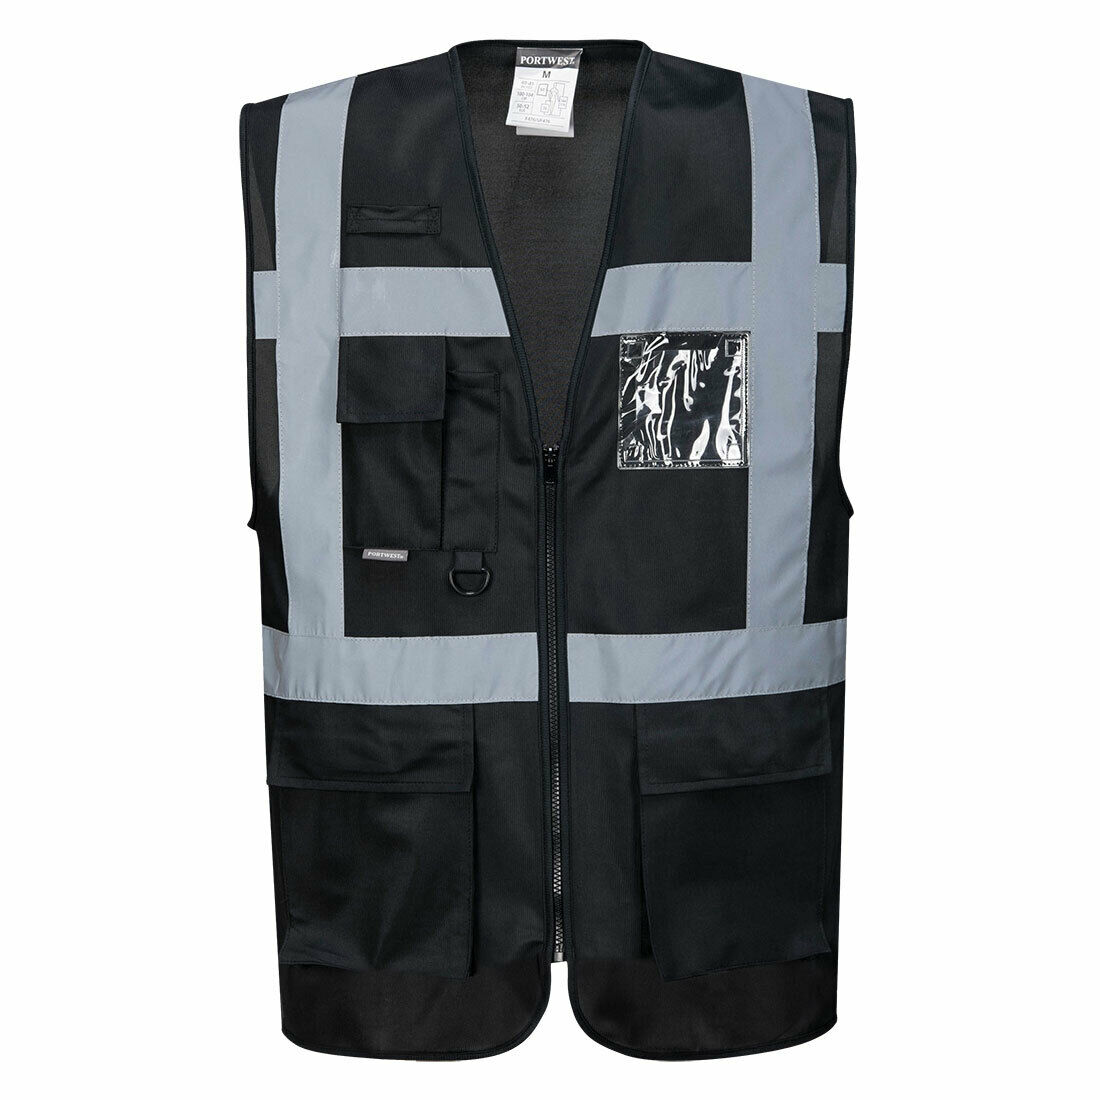 Portwest Uf476 Iona Executive Safety Lightweight Zip Vest With Reflective Tape